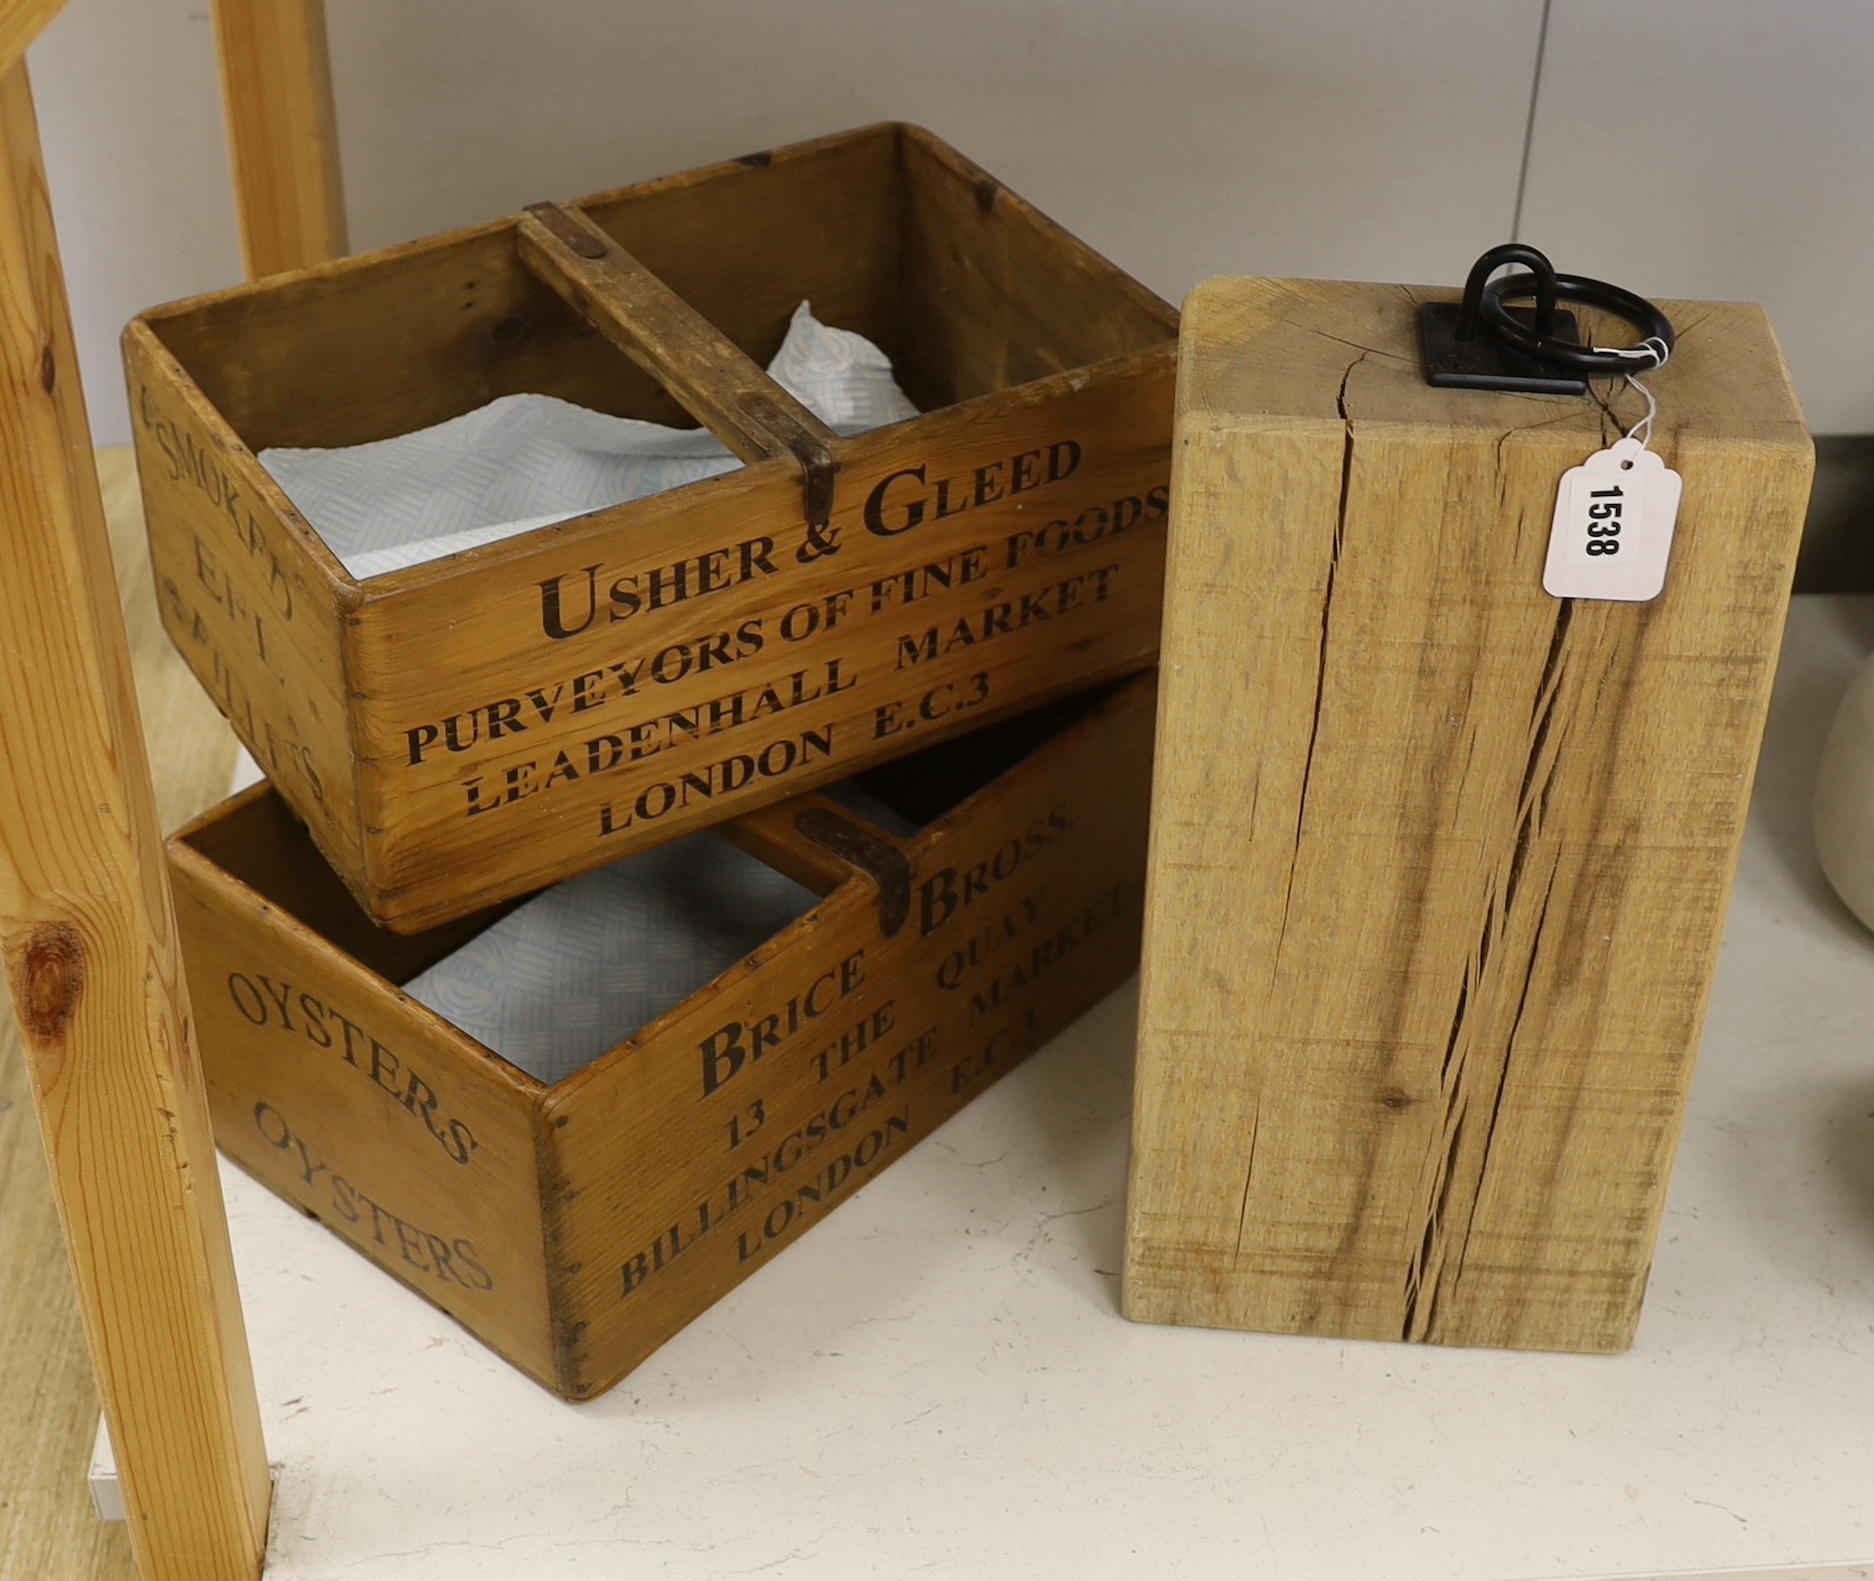 Wooden ware, an Usher &Gleed Fine Foods box and a Brice Bross, Billingate Market box, together with a large wooden weight, weight 40cm high